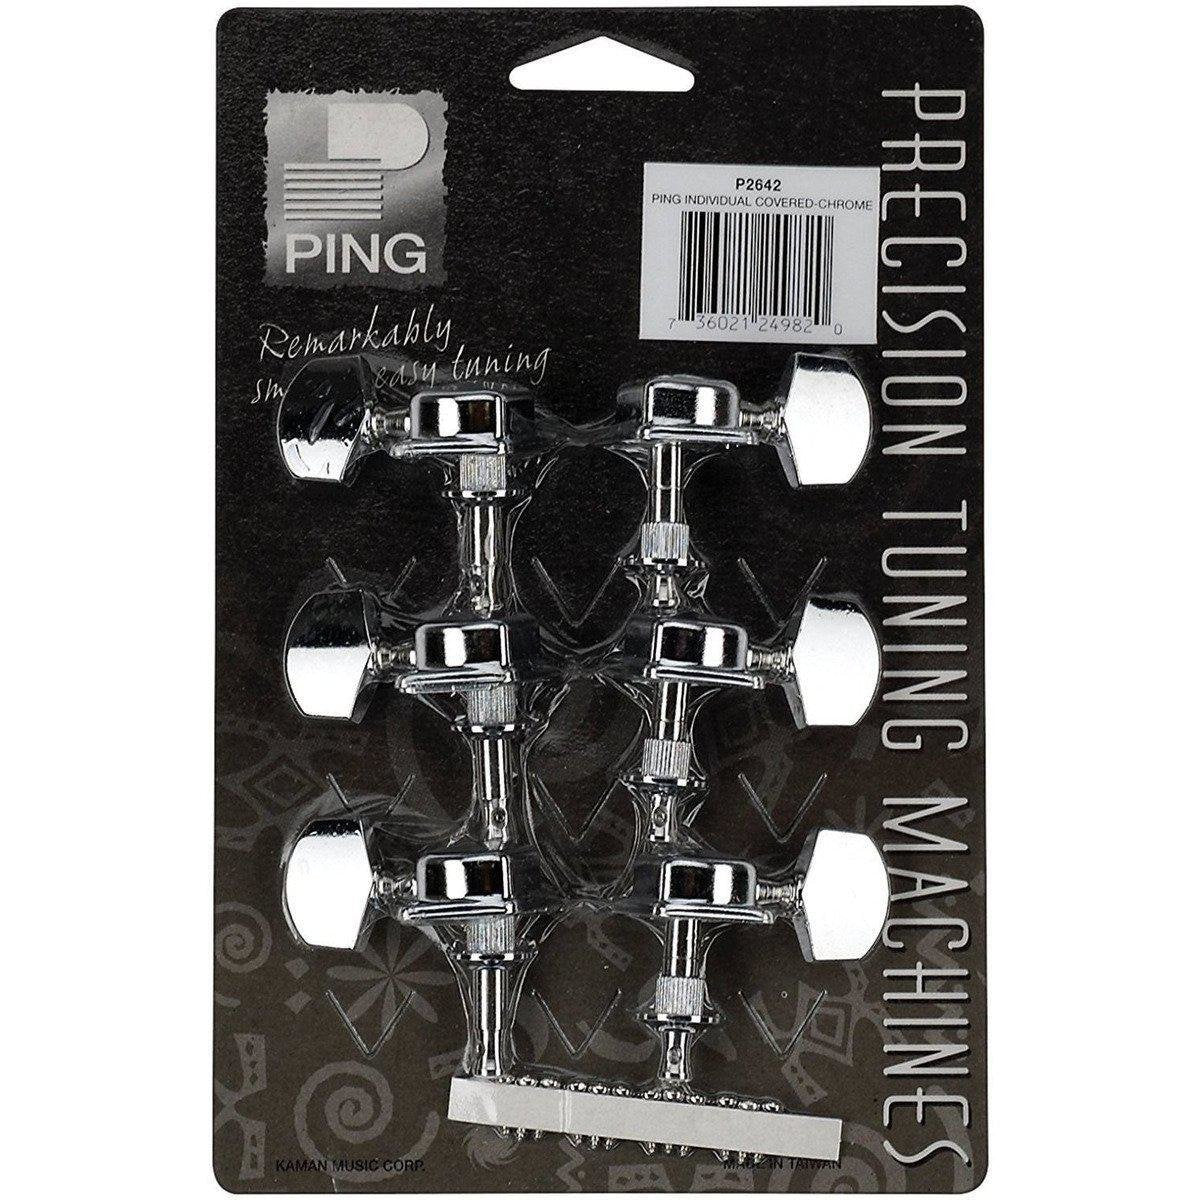 Ping Economy Covered Chrome Guitar Tuning Machines-Andy's Music